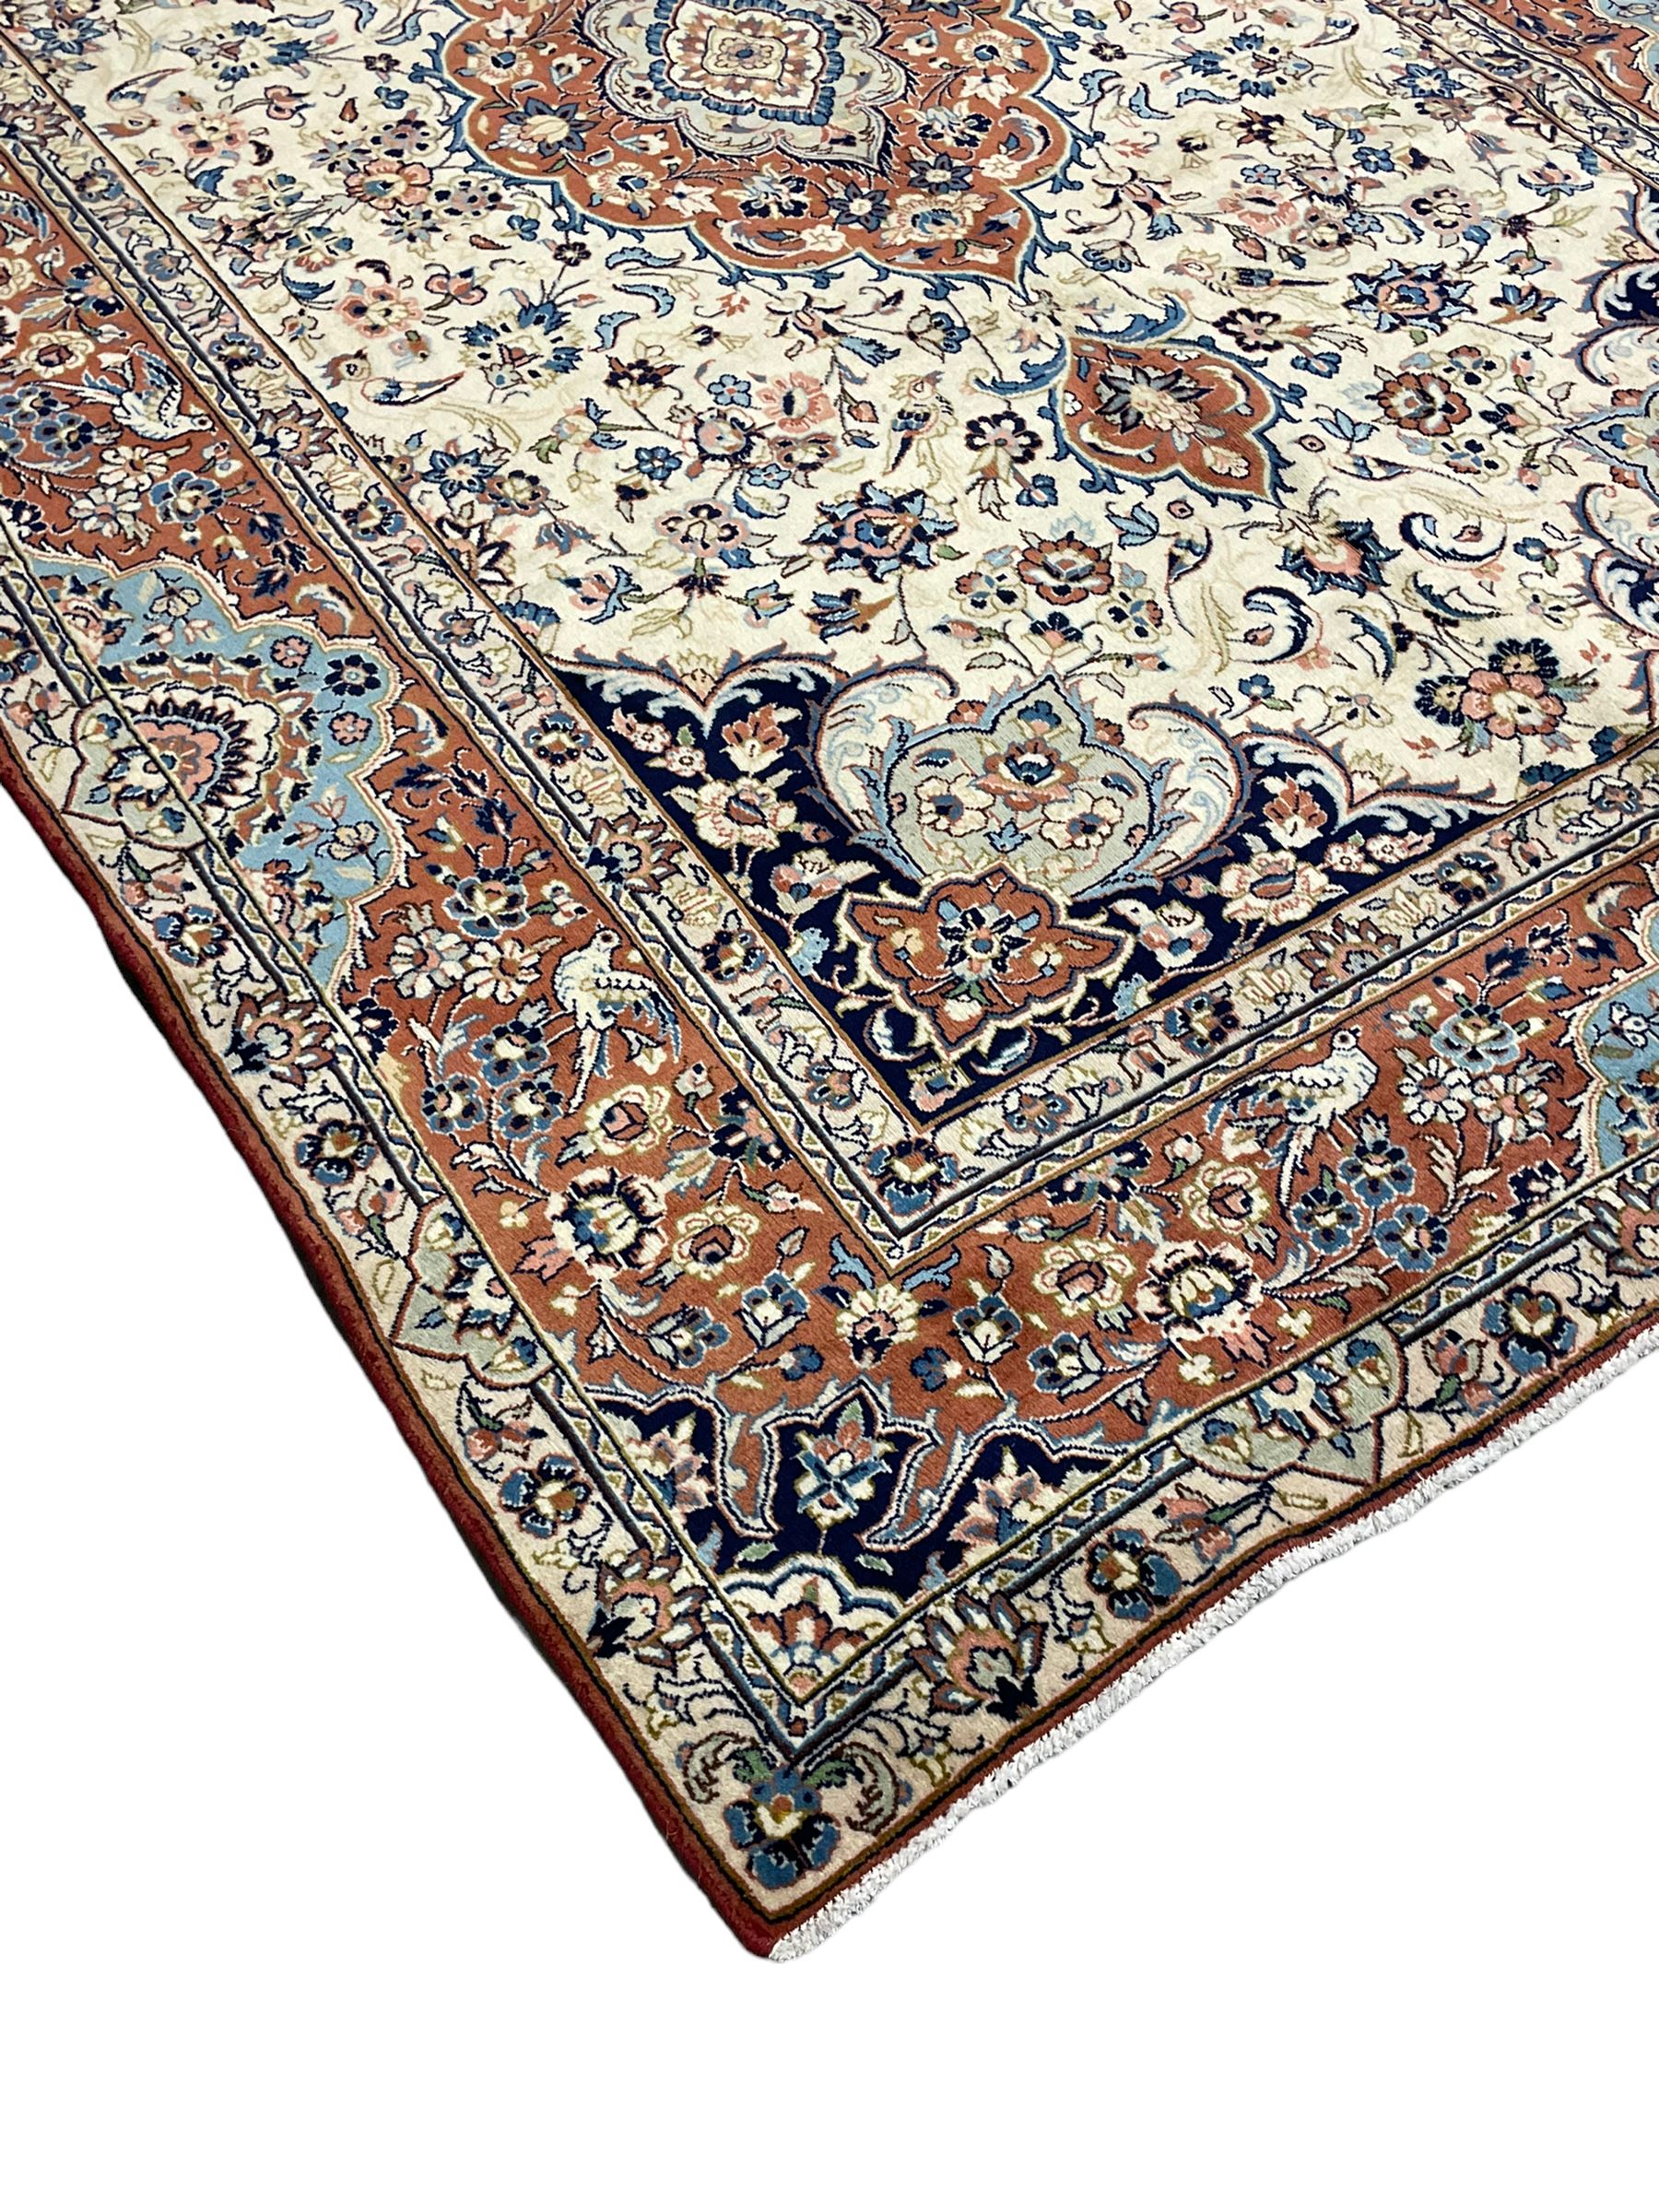 Persian ivory and peach ground rug - Image 5 of 12